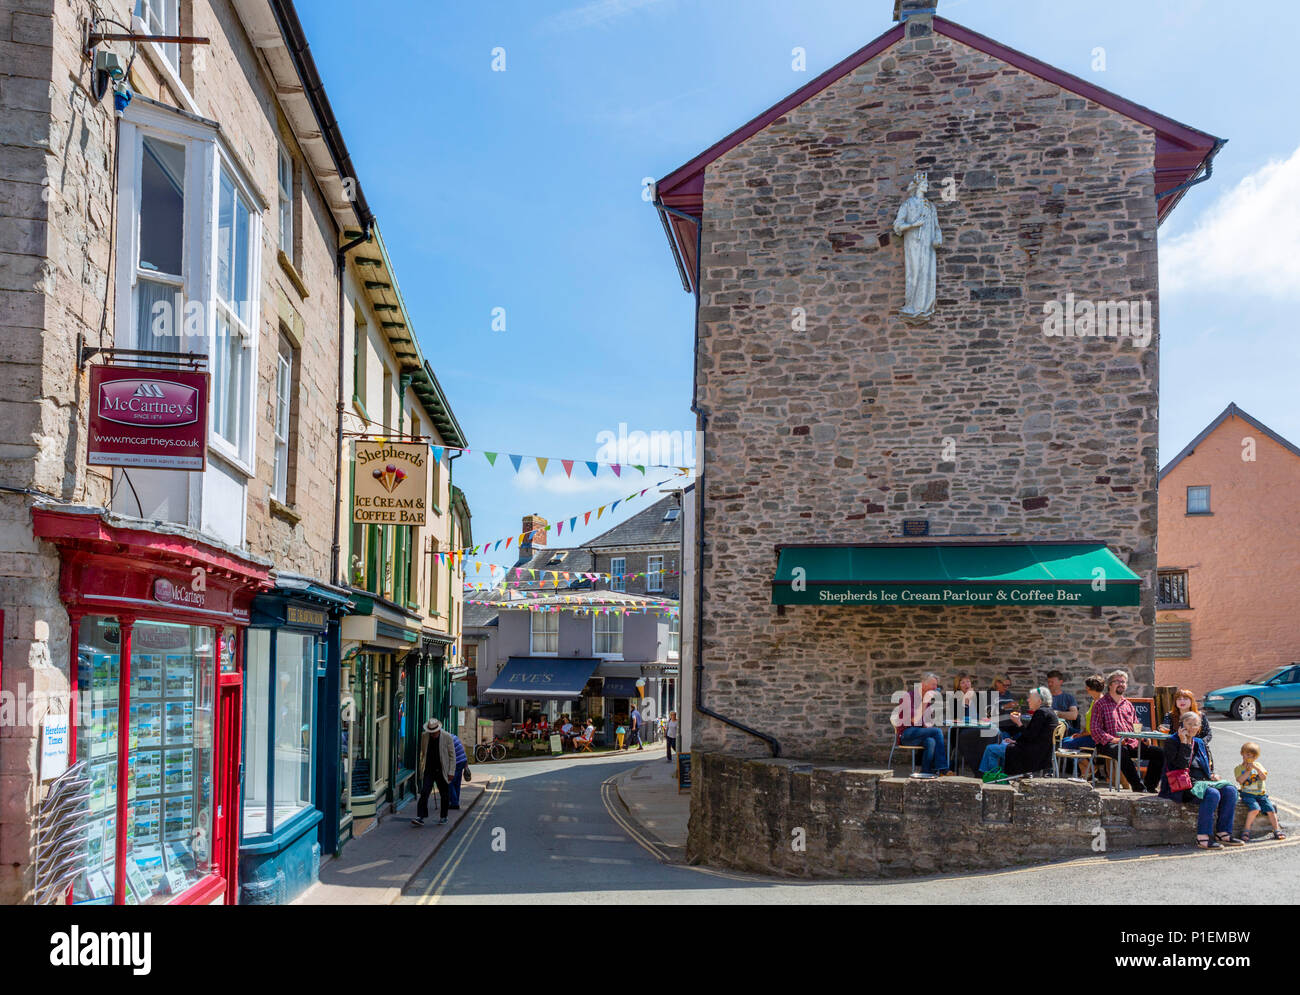 Cafe and shops in the town centre, Hay-on-Wye, Powys, Wales, UK Stock Photo